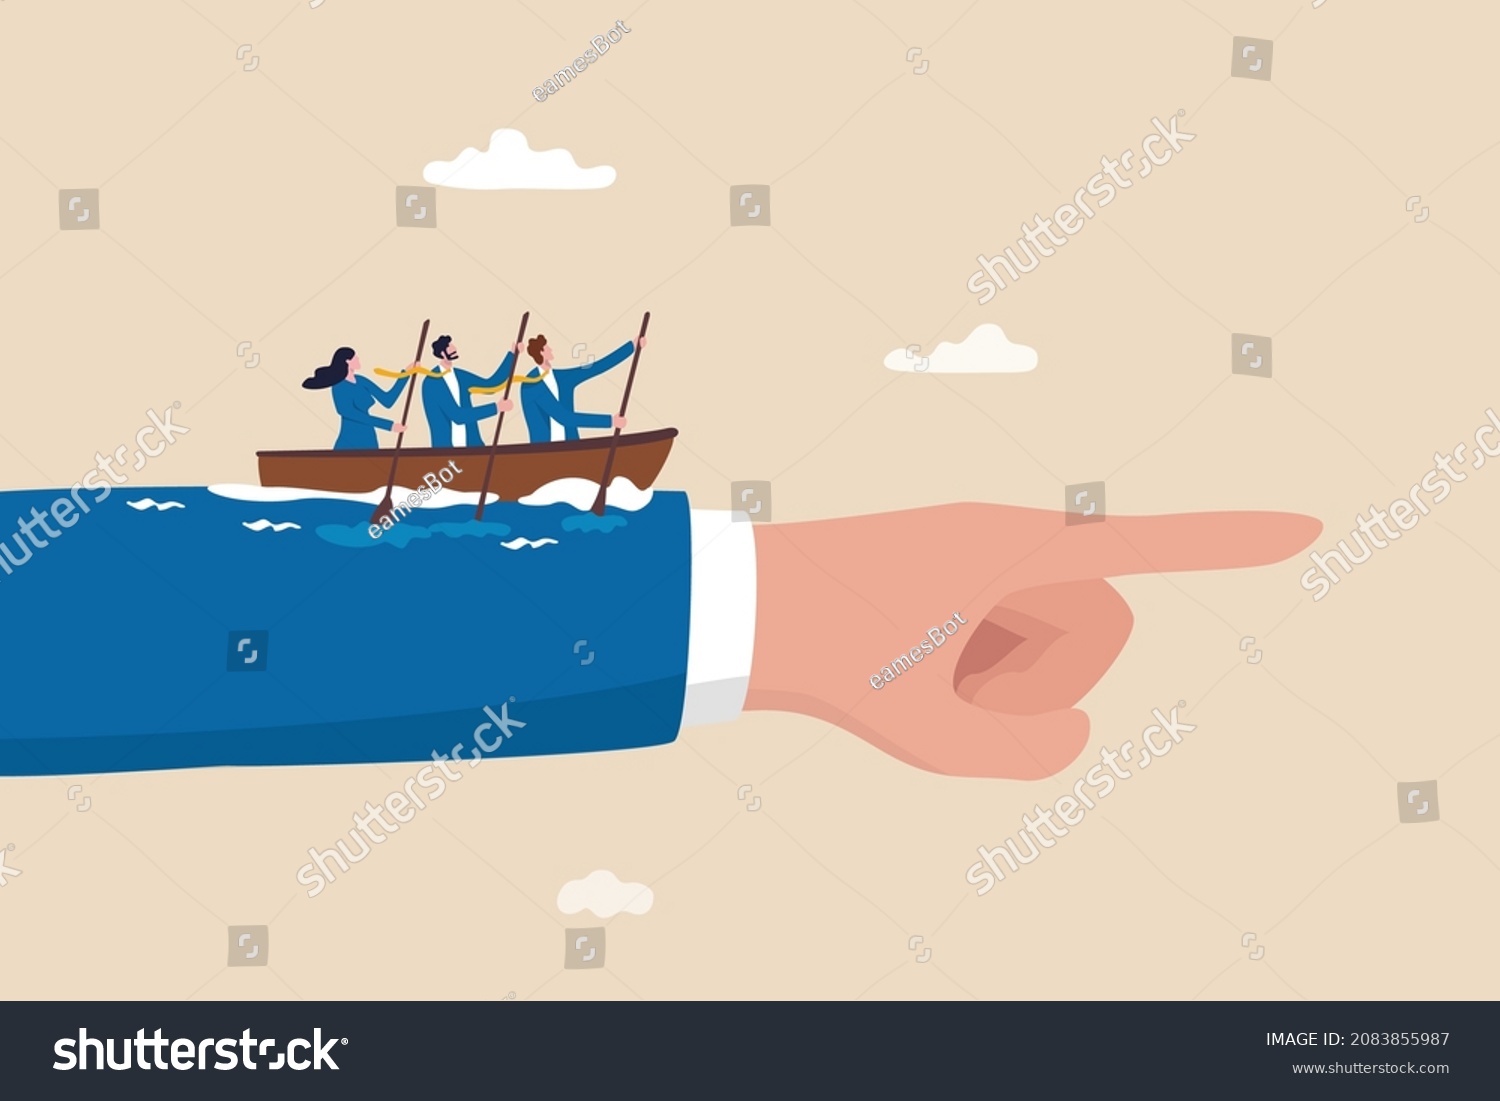 Team direction, business decision or leadership, guidance or strategy to achieve success, determination and inspiration concept, business people team members sailing ship on boss pointing direction. #2083855987